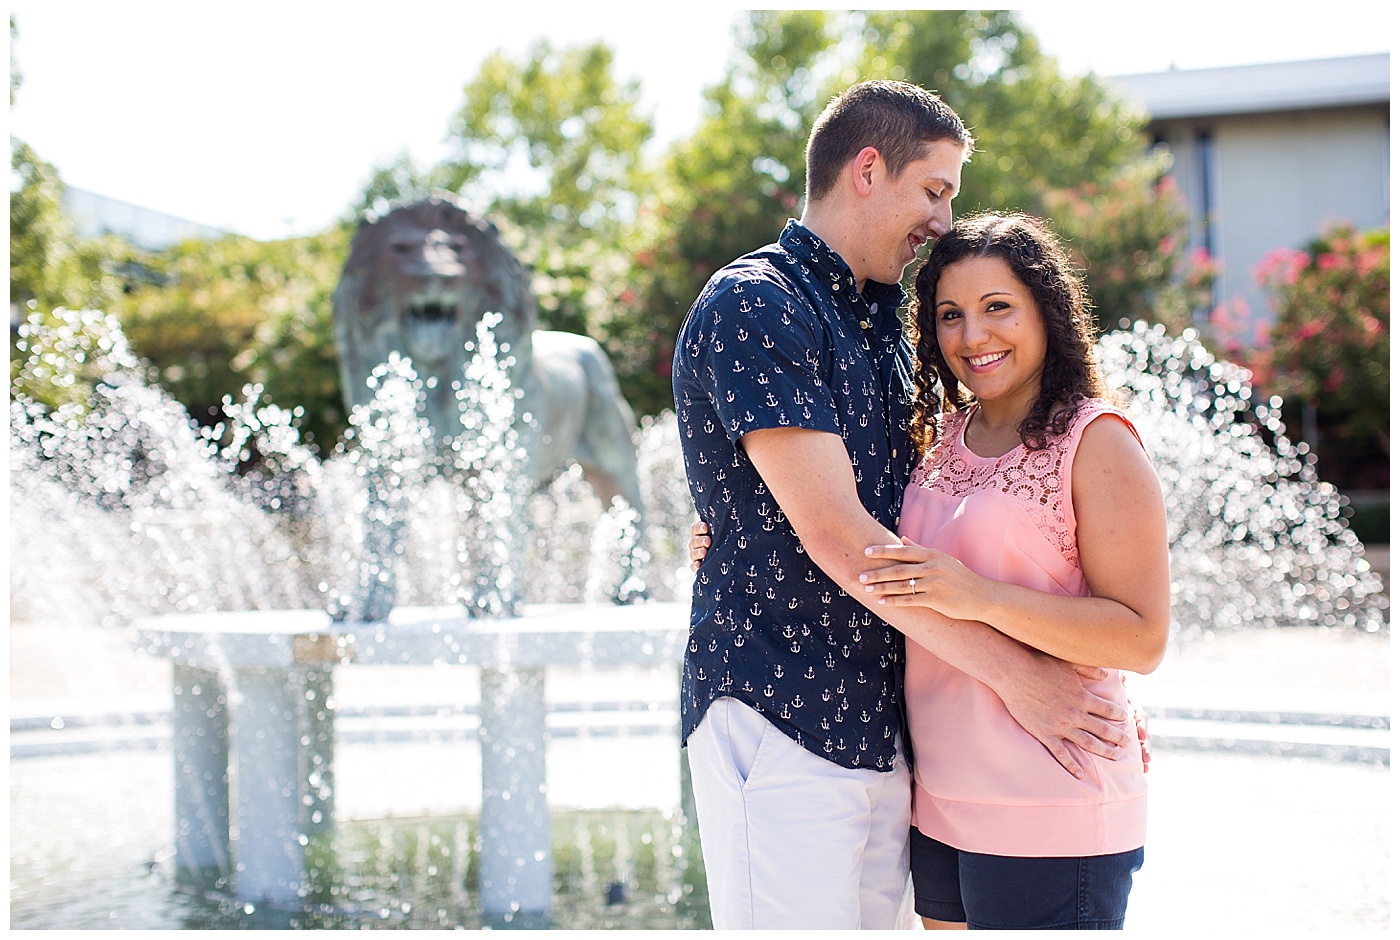 Sarah & Nick are Engaged!  Thanks for showing me around ODU!!  